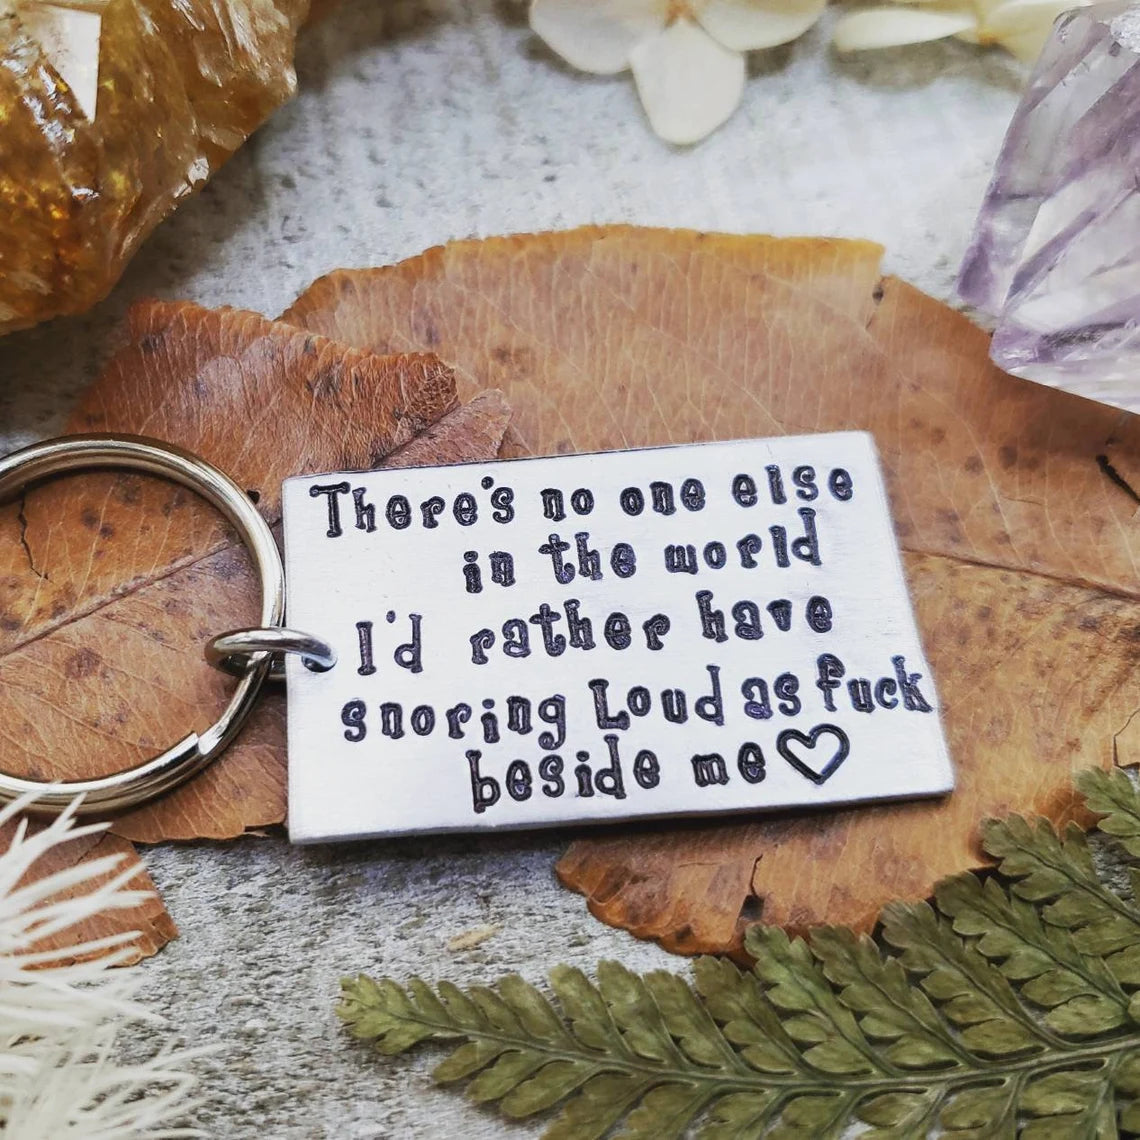 No one else in the world keychain